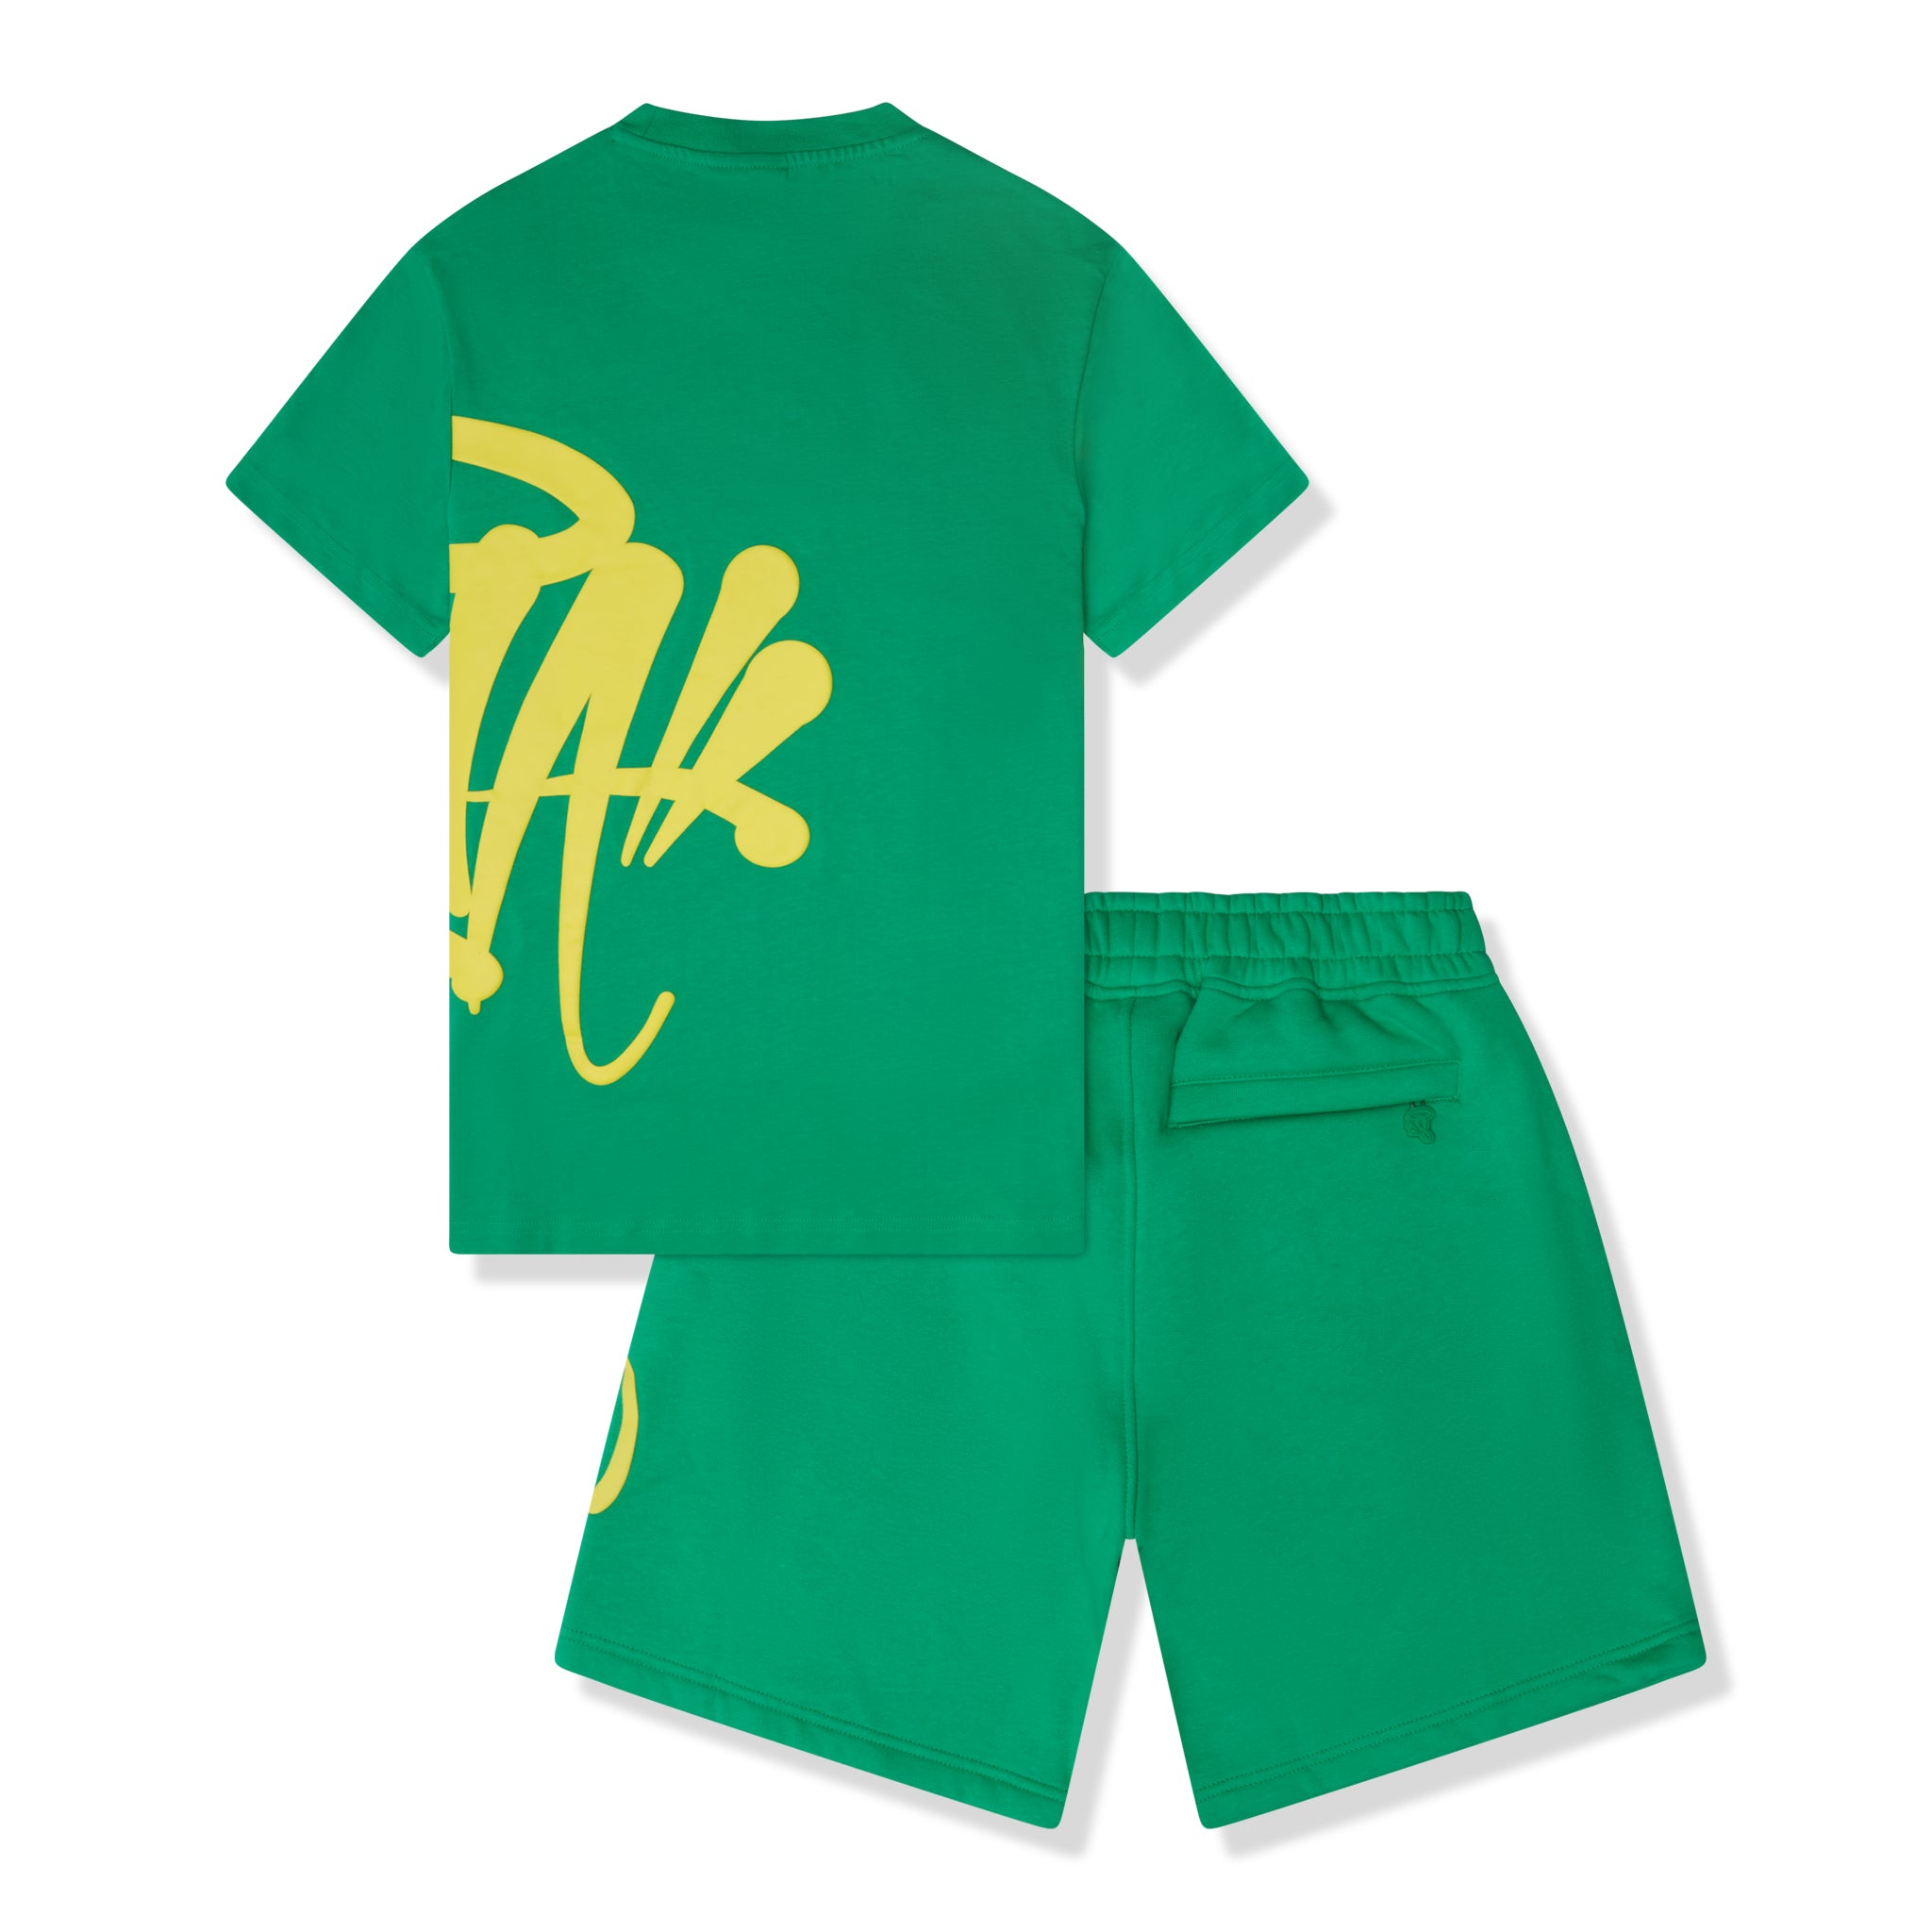 Back view of Syna World Team Syna Twinset Green T-Shirt & Shorts